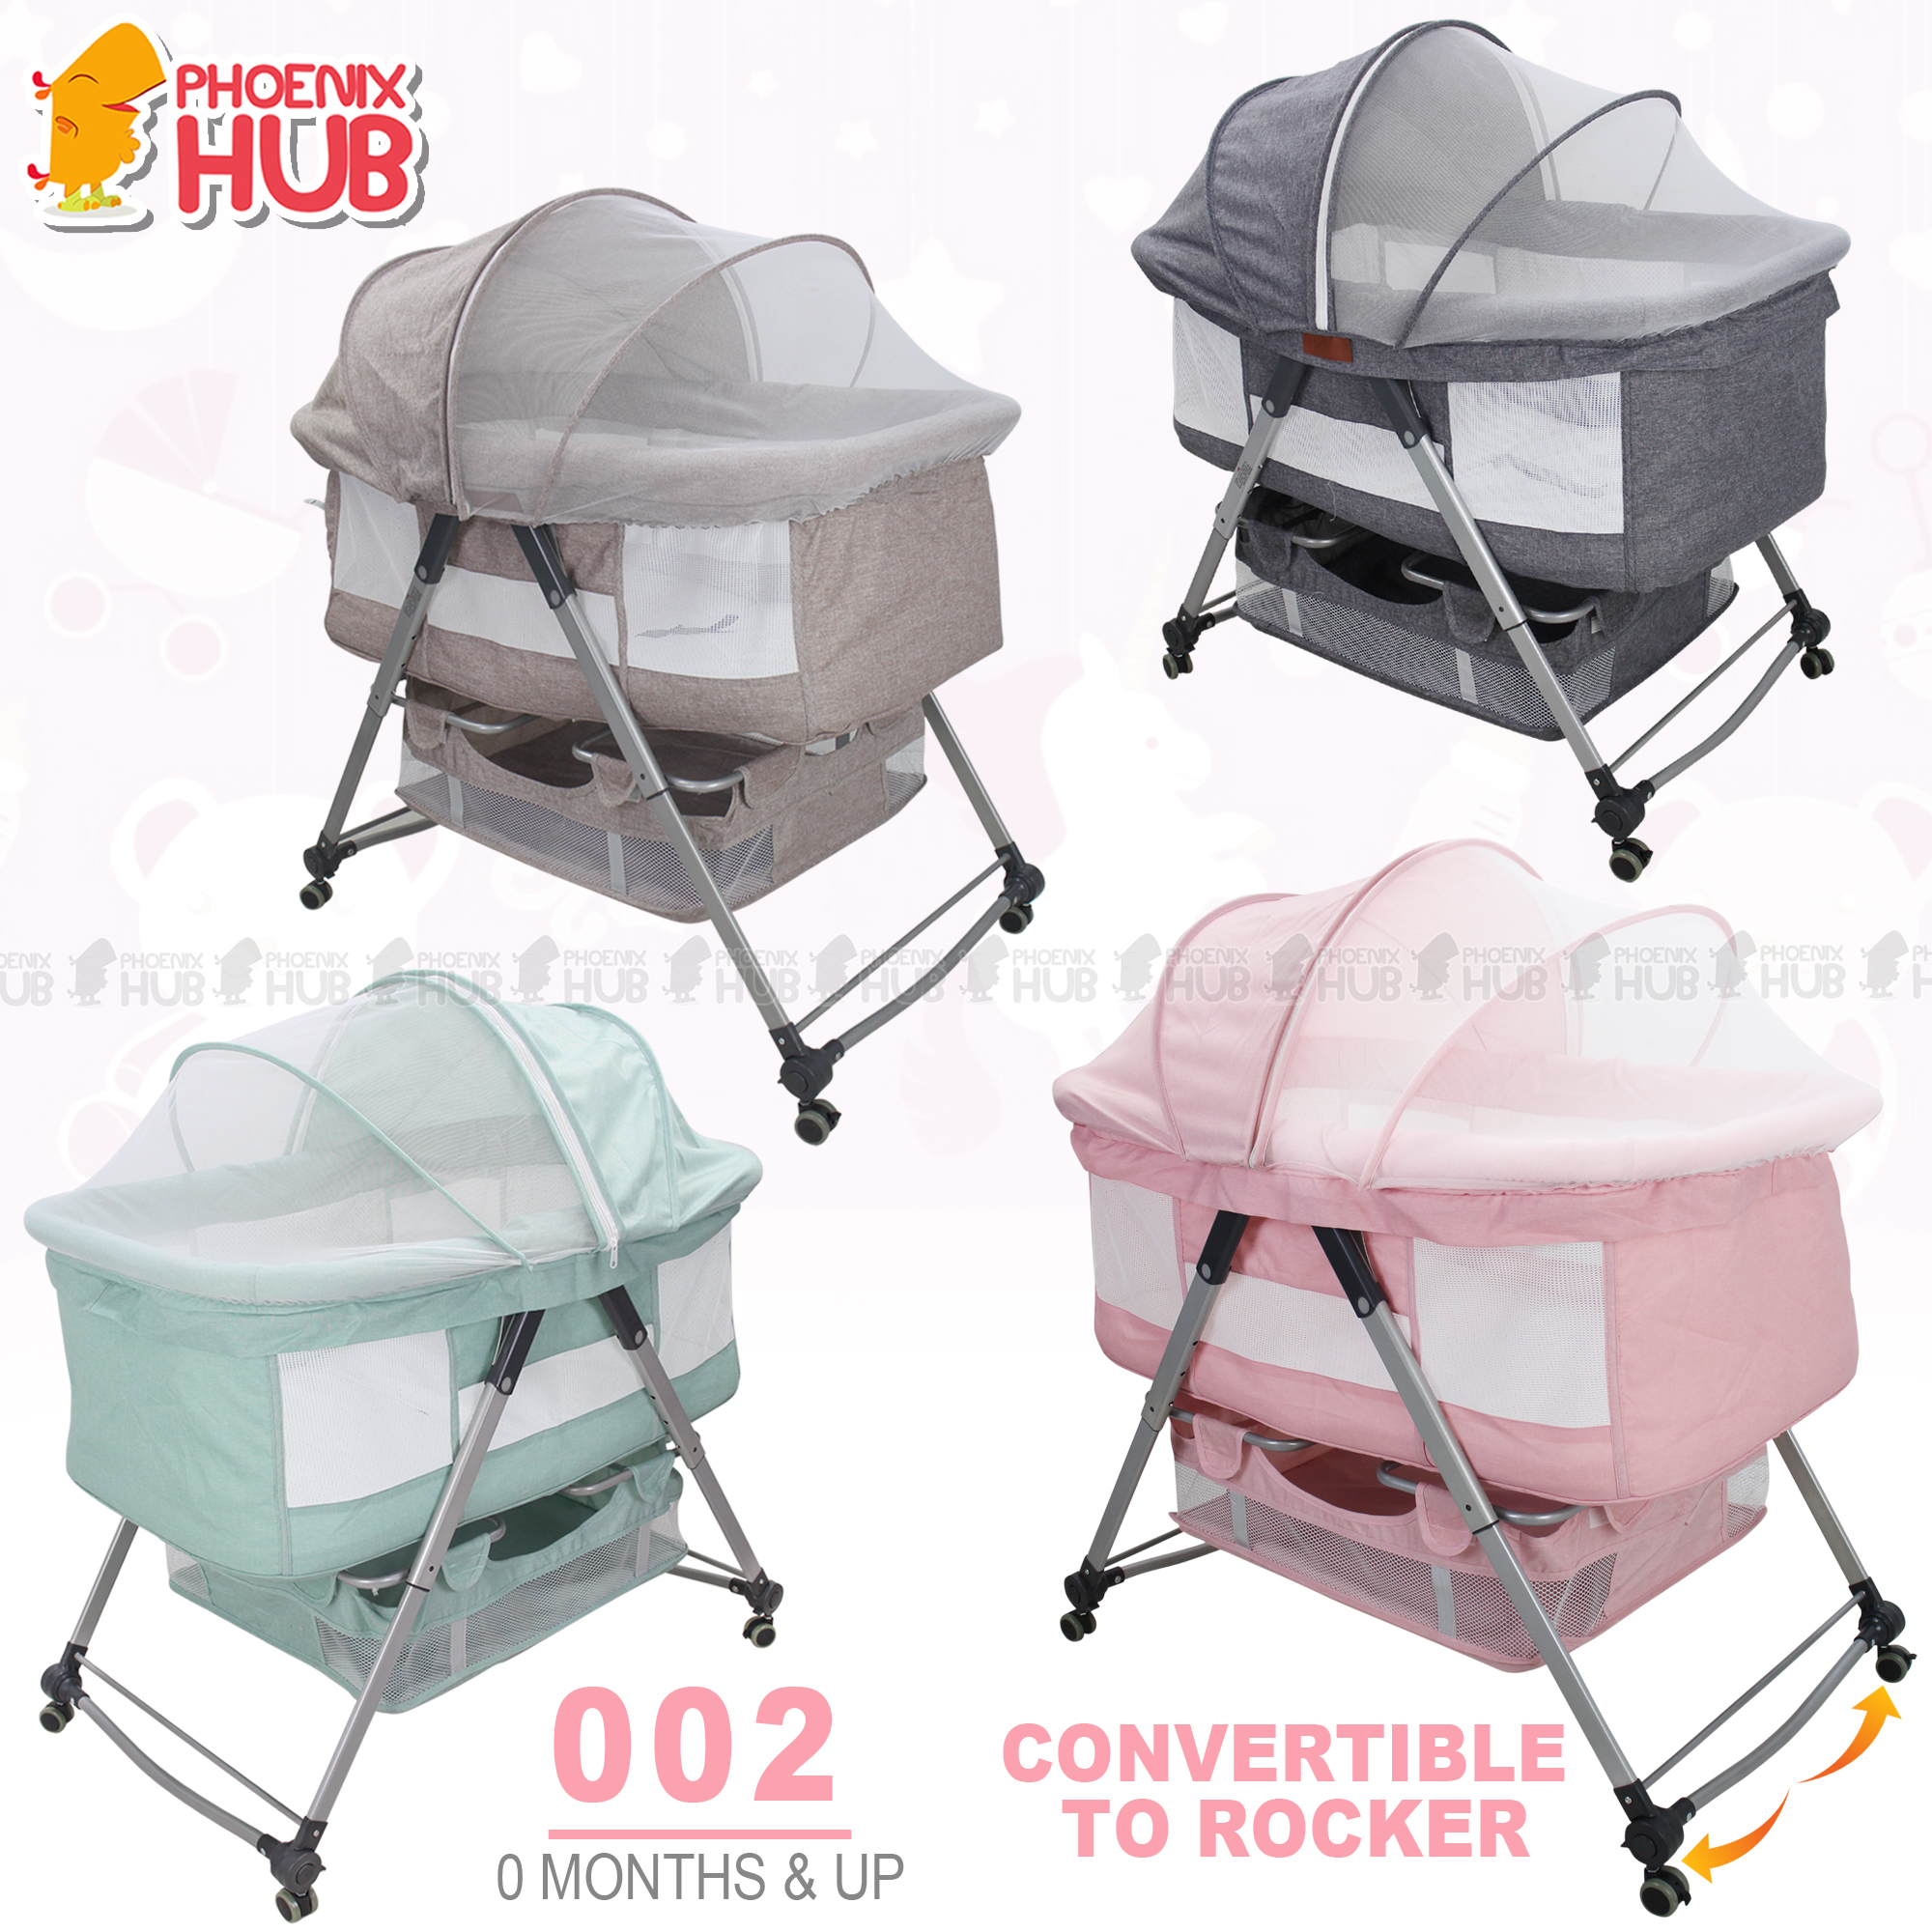 Portable Baby Travel Cot Dome Port-a-cot Bed Crib Sleeper fold Infant 